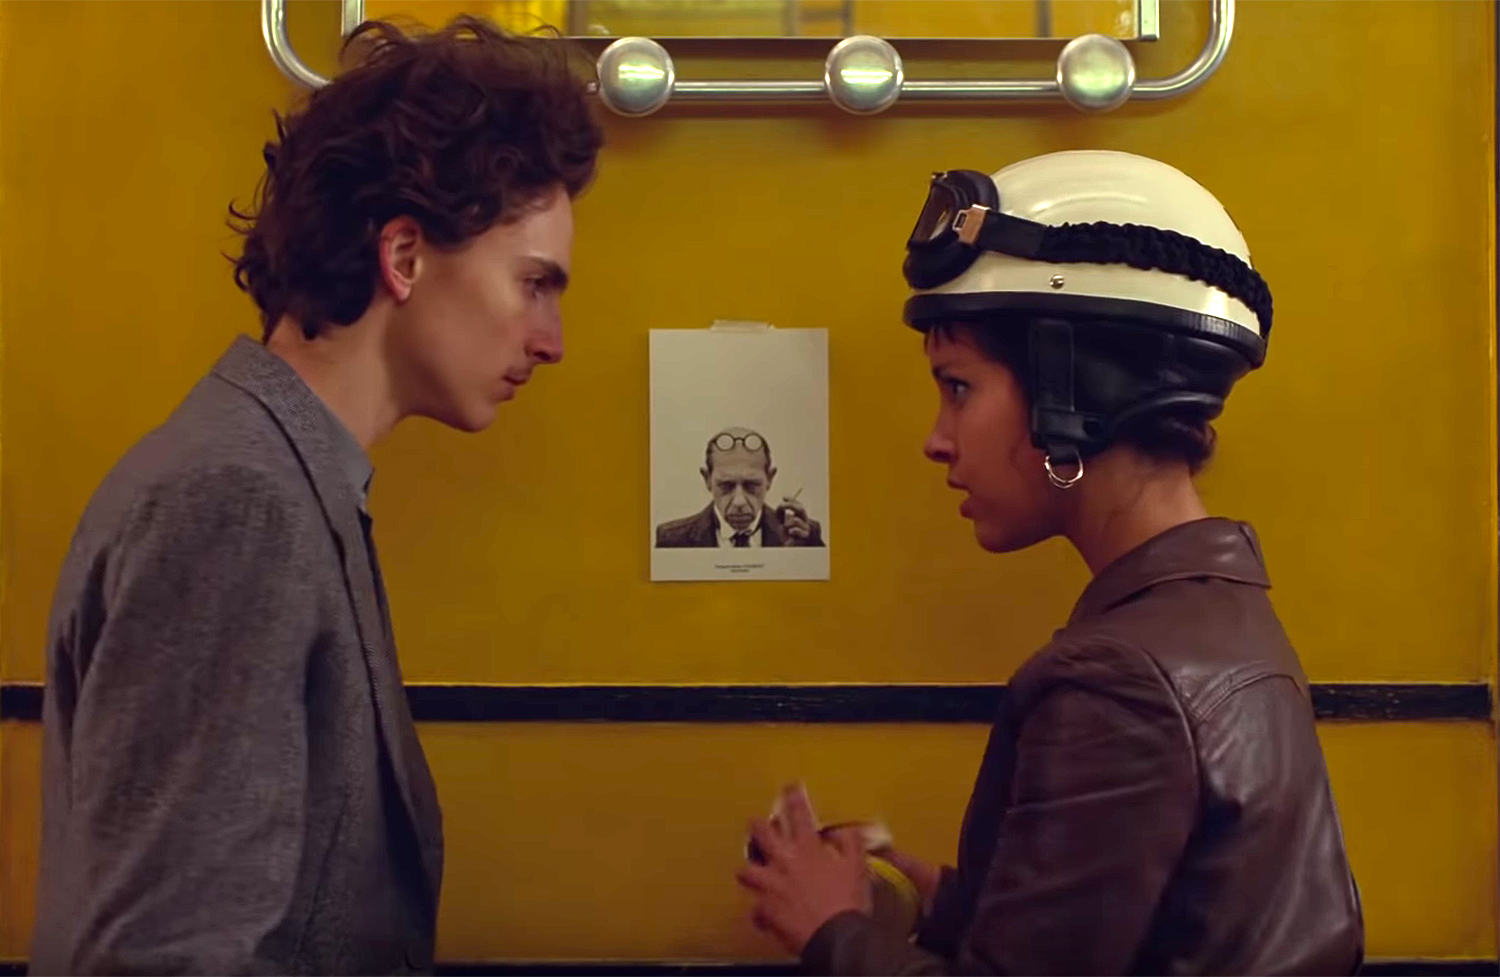 Timothée Chalamet and Saoirse Ronan Reunite in Trailer for Wes Anderson’s The French Dispatch